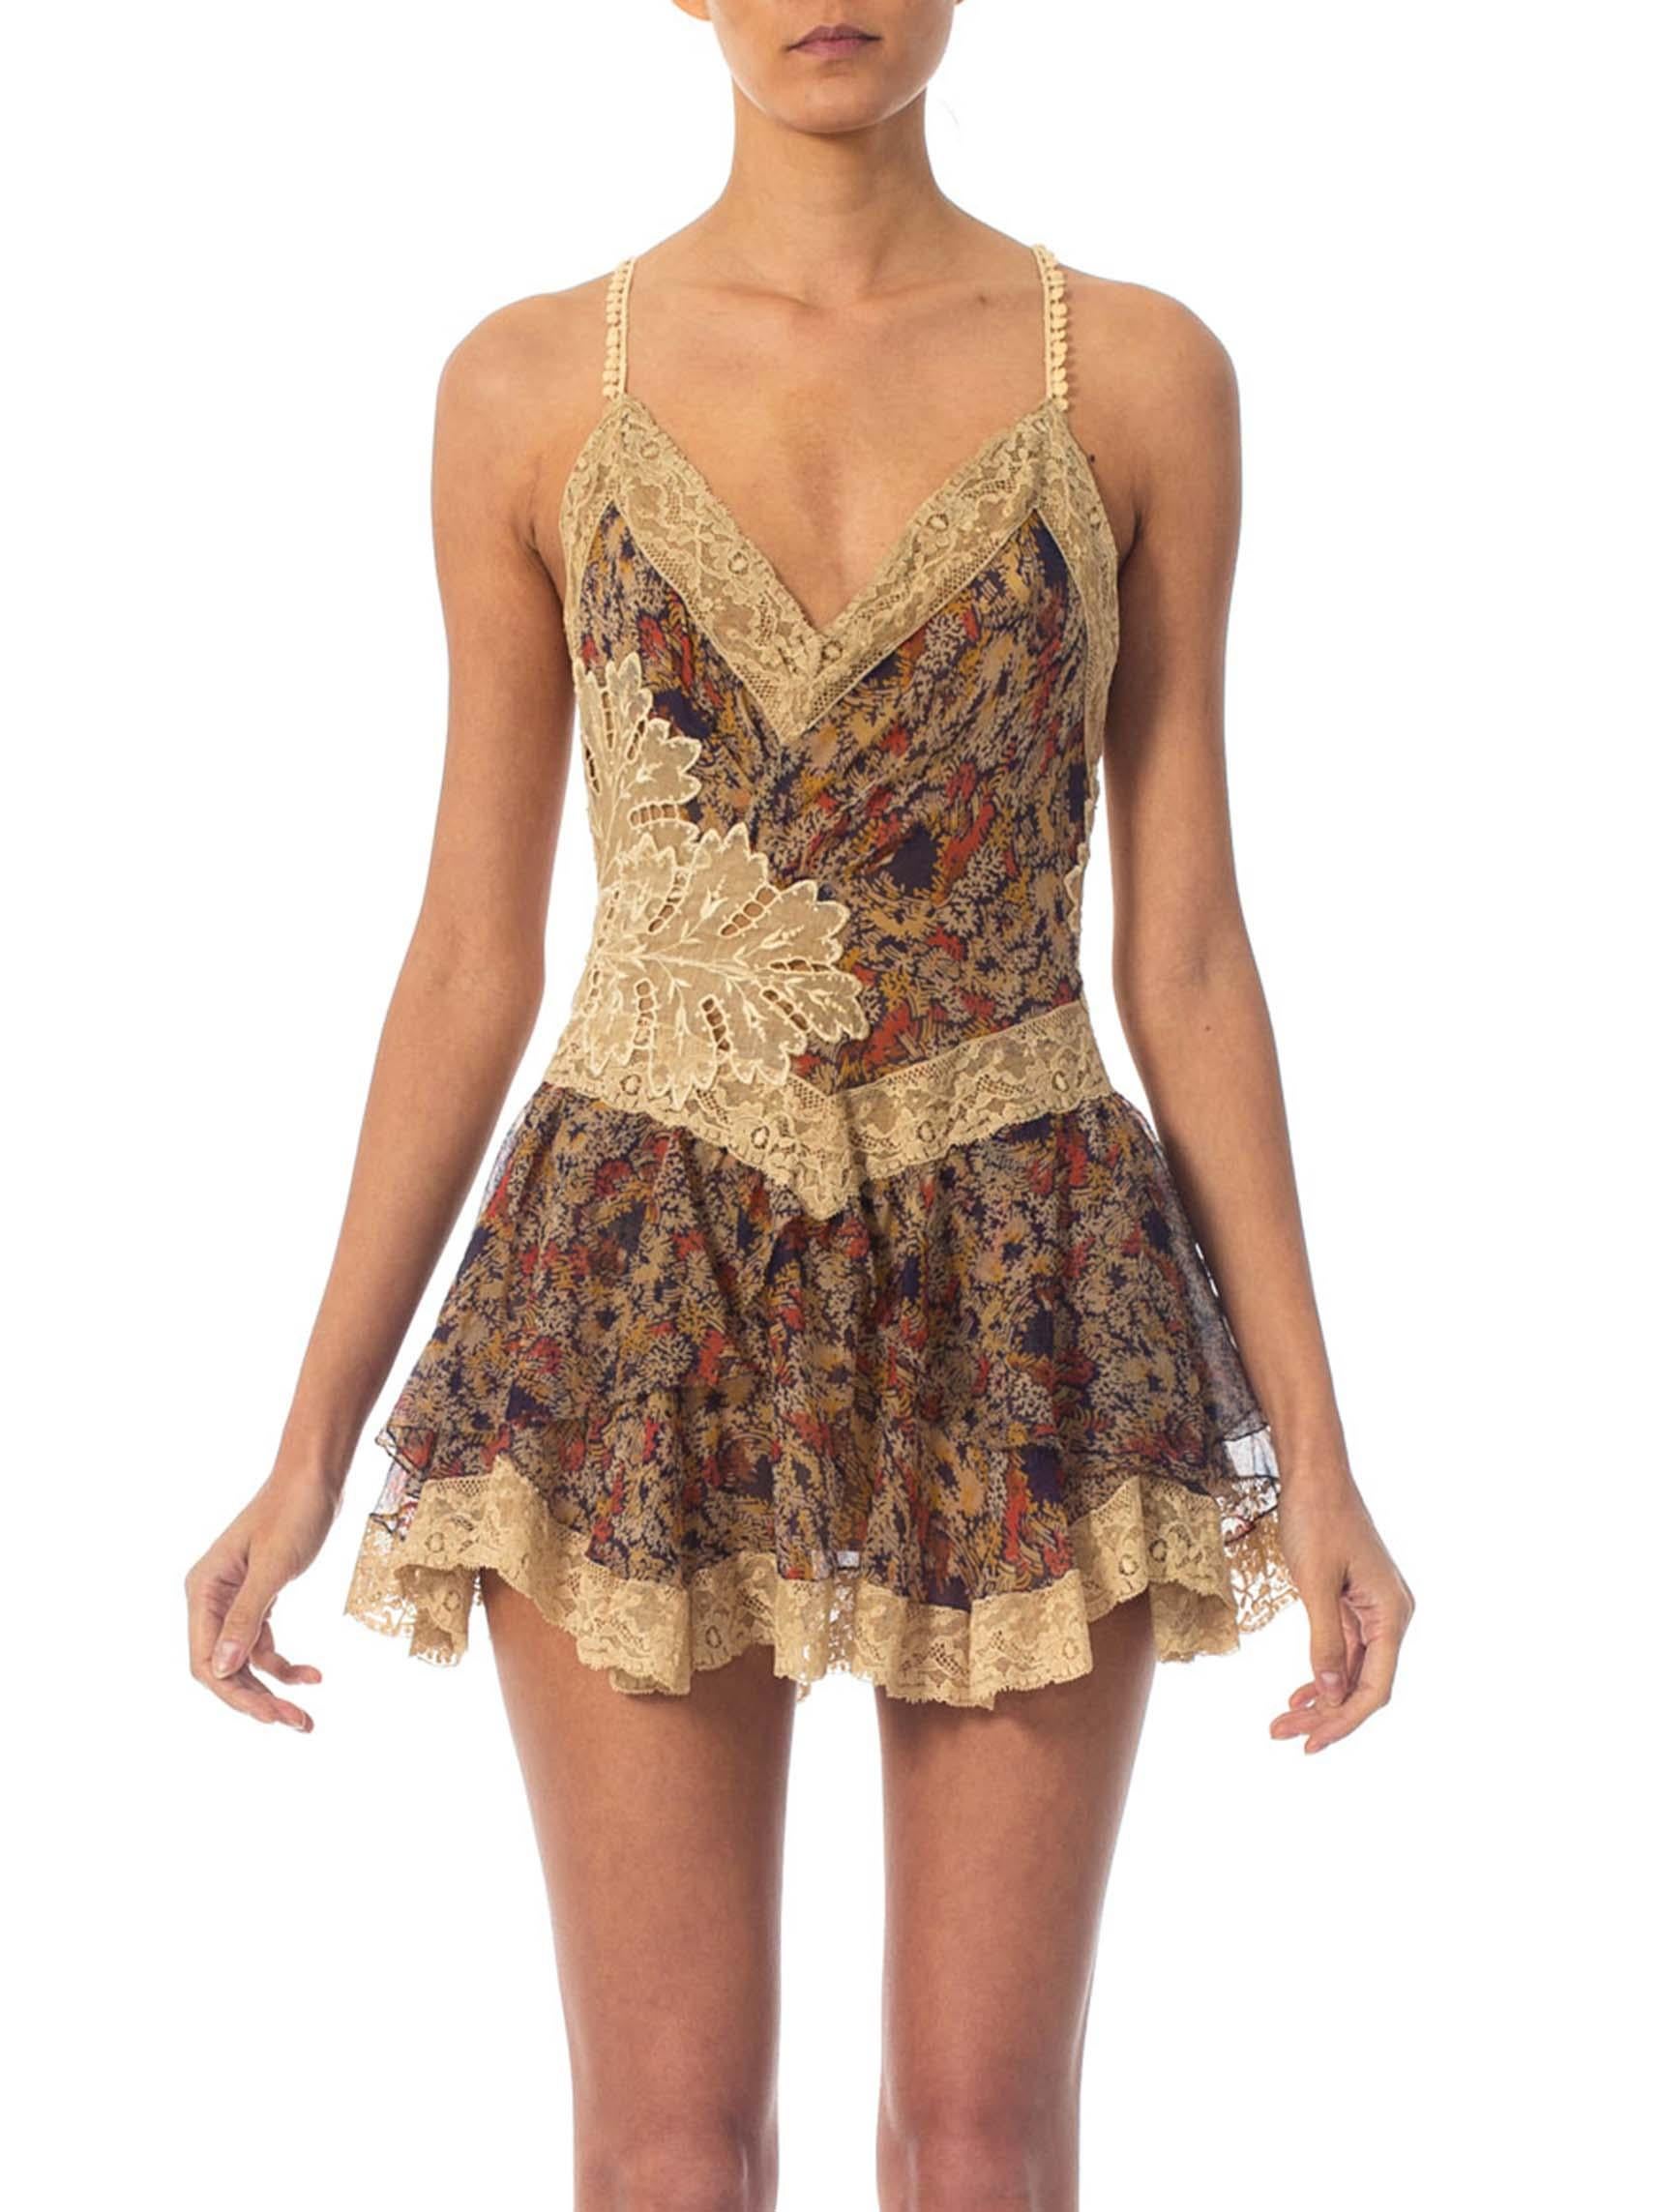 MORPHEW COLLECTION 1920S Silk Chiffon & Victorian Lace Mini Dress Entirely Sewn By Hand